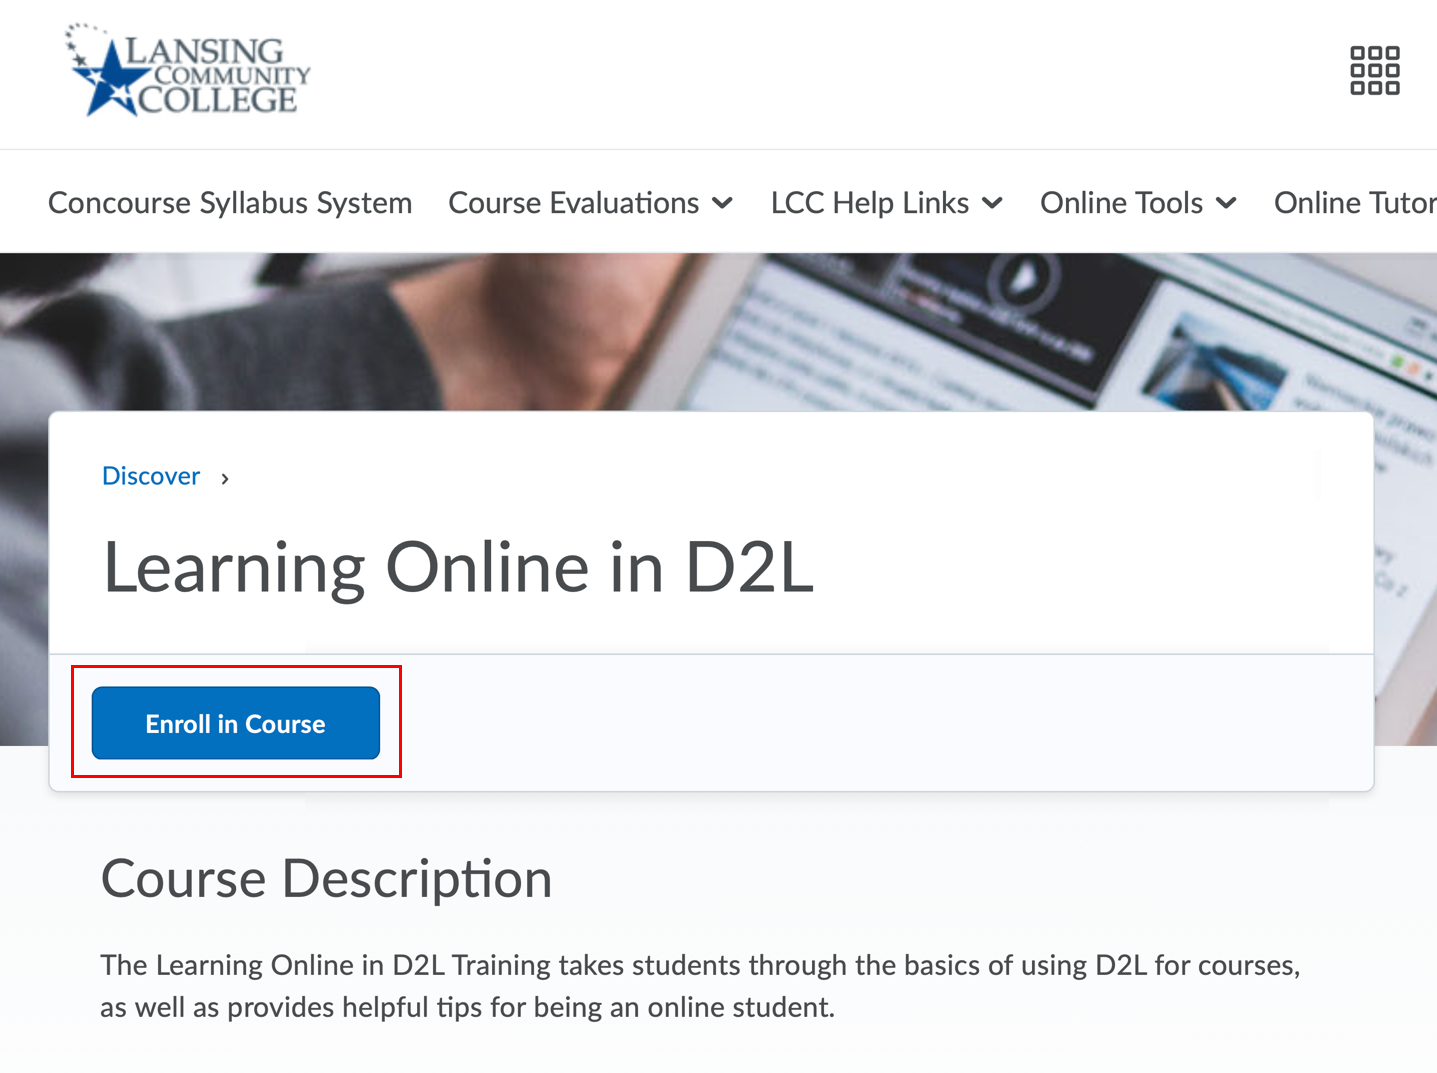 Enroll in Course button highlighted.